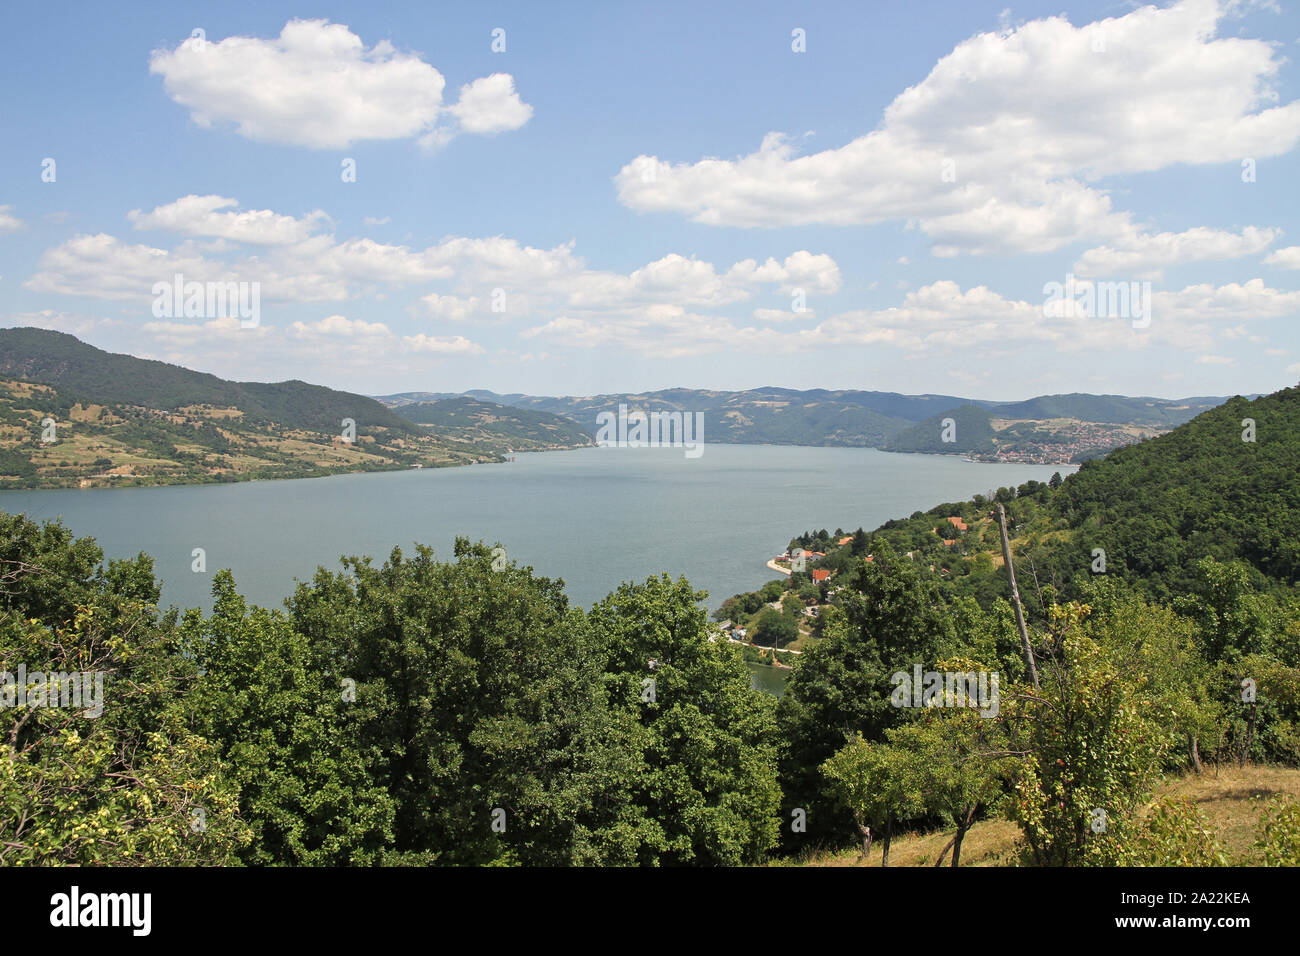 View of the Danube River from Lower Milanovac, Border between Serbia and Romania, Karapacos, Lower Milanovac, Serbia. Stock Photo